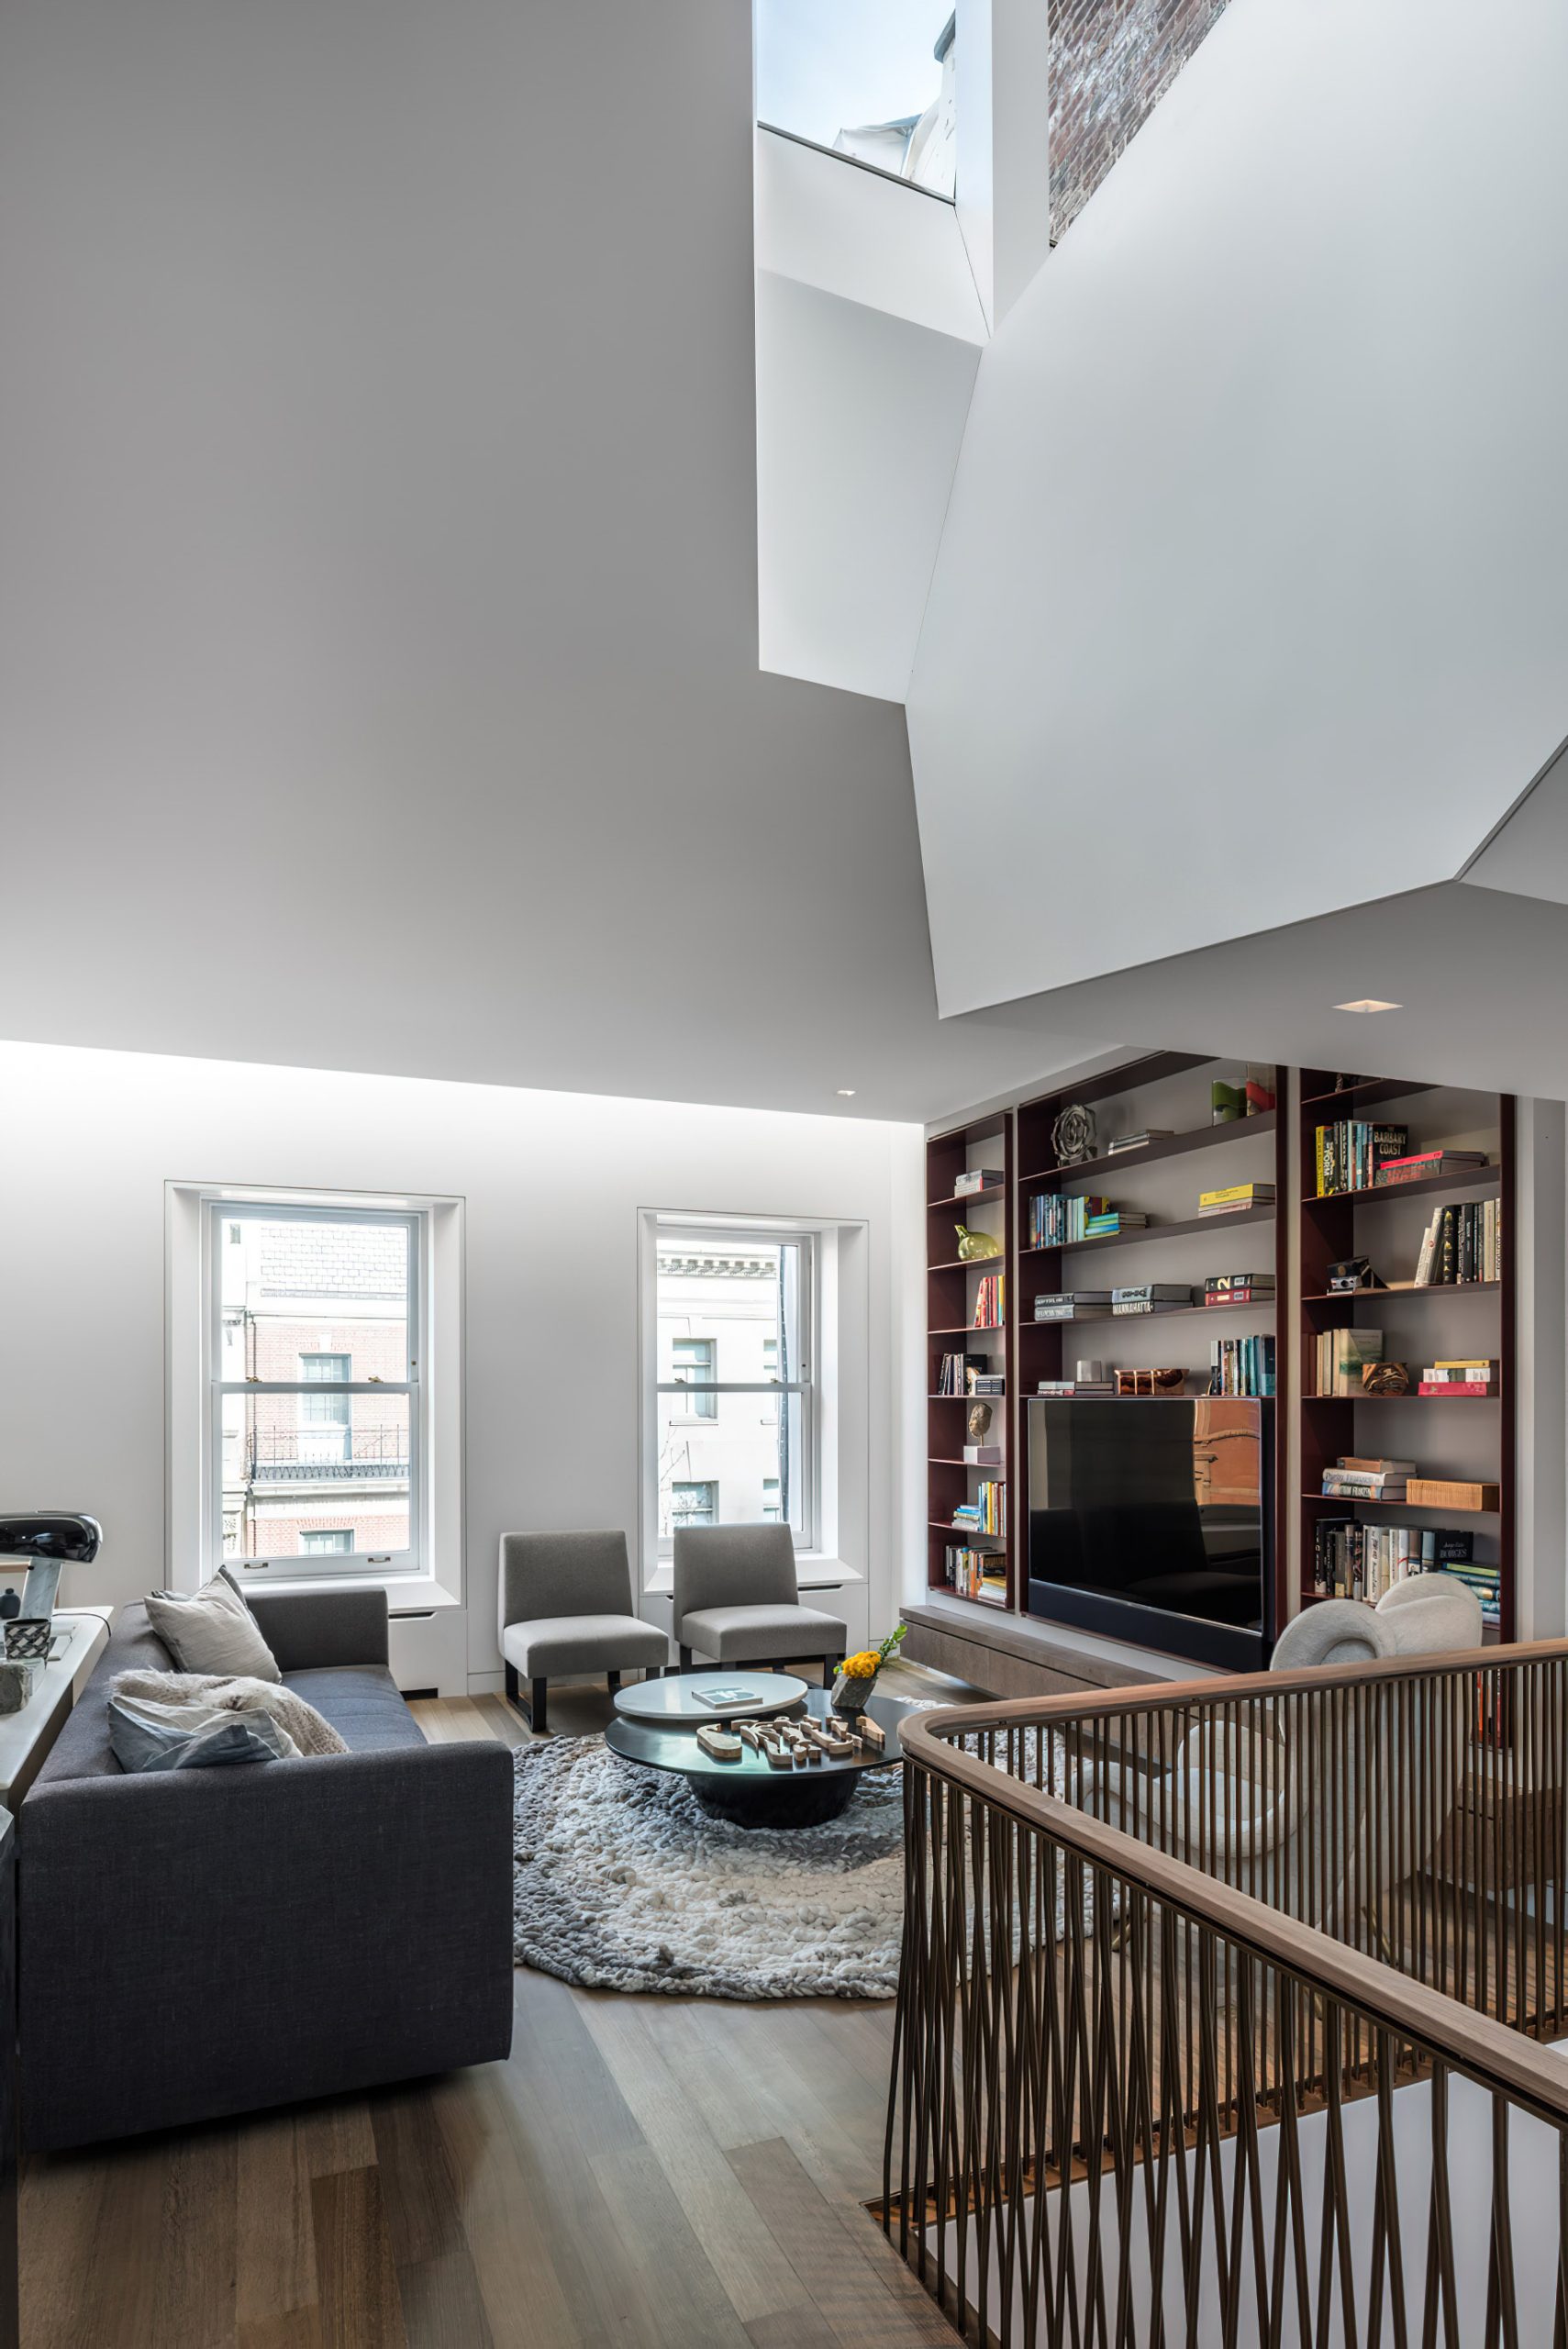 Upper East Side Townhouse Interior New York, NY, USA - Michael K Chen